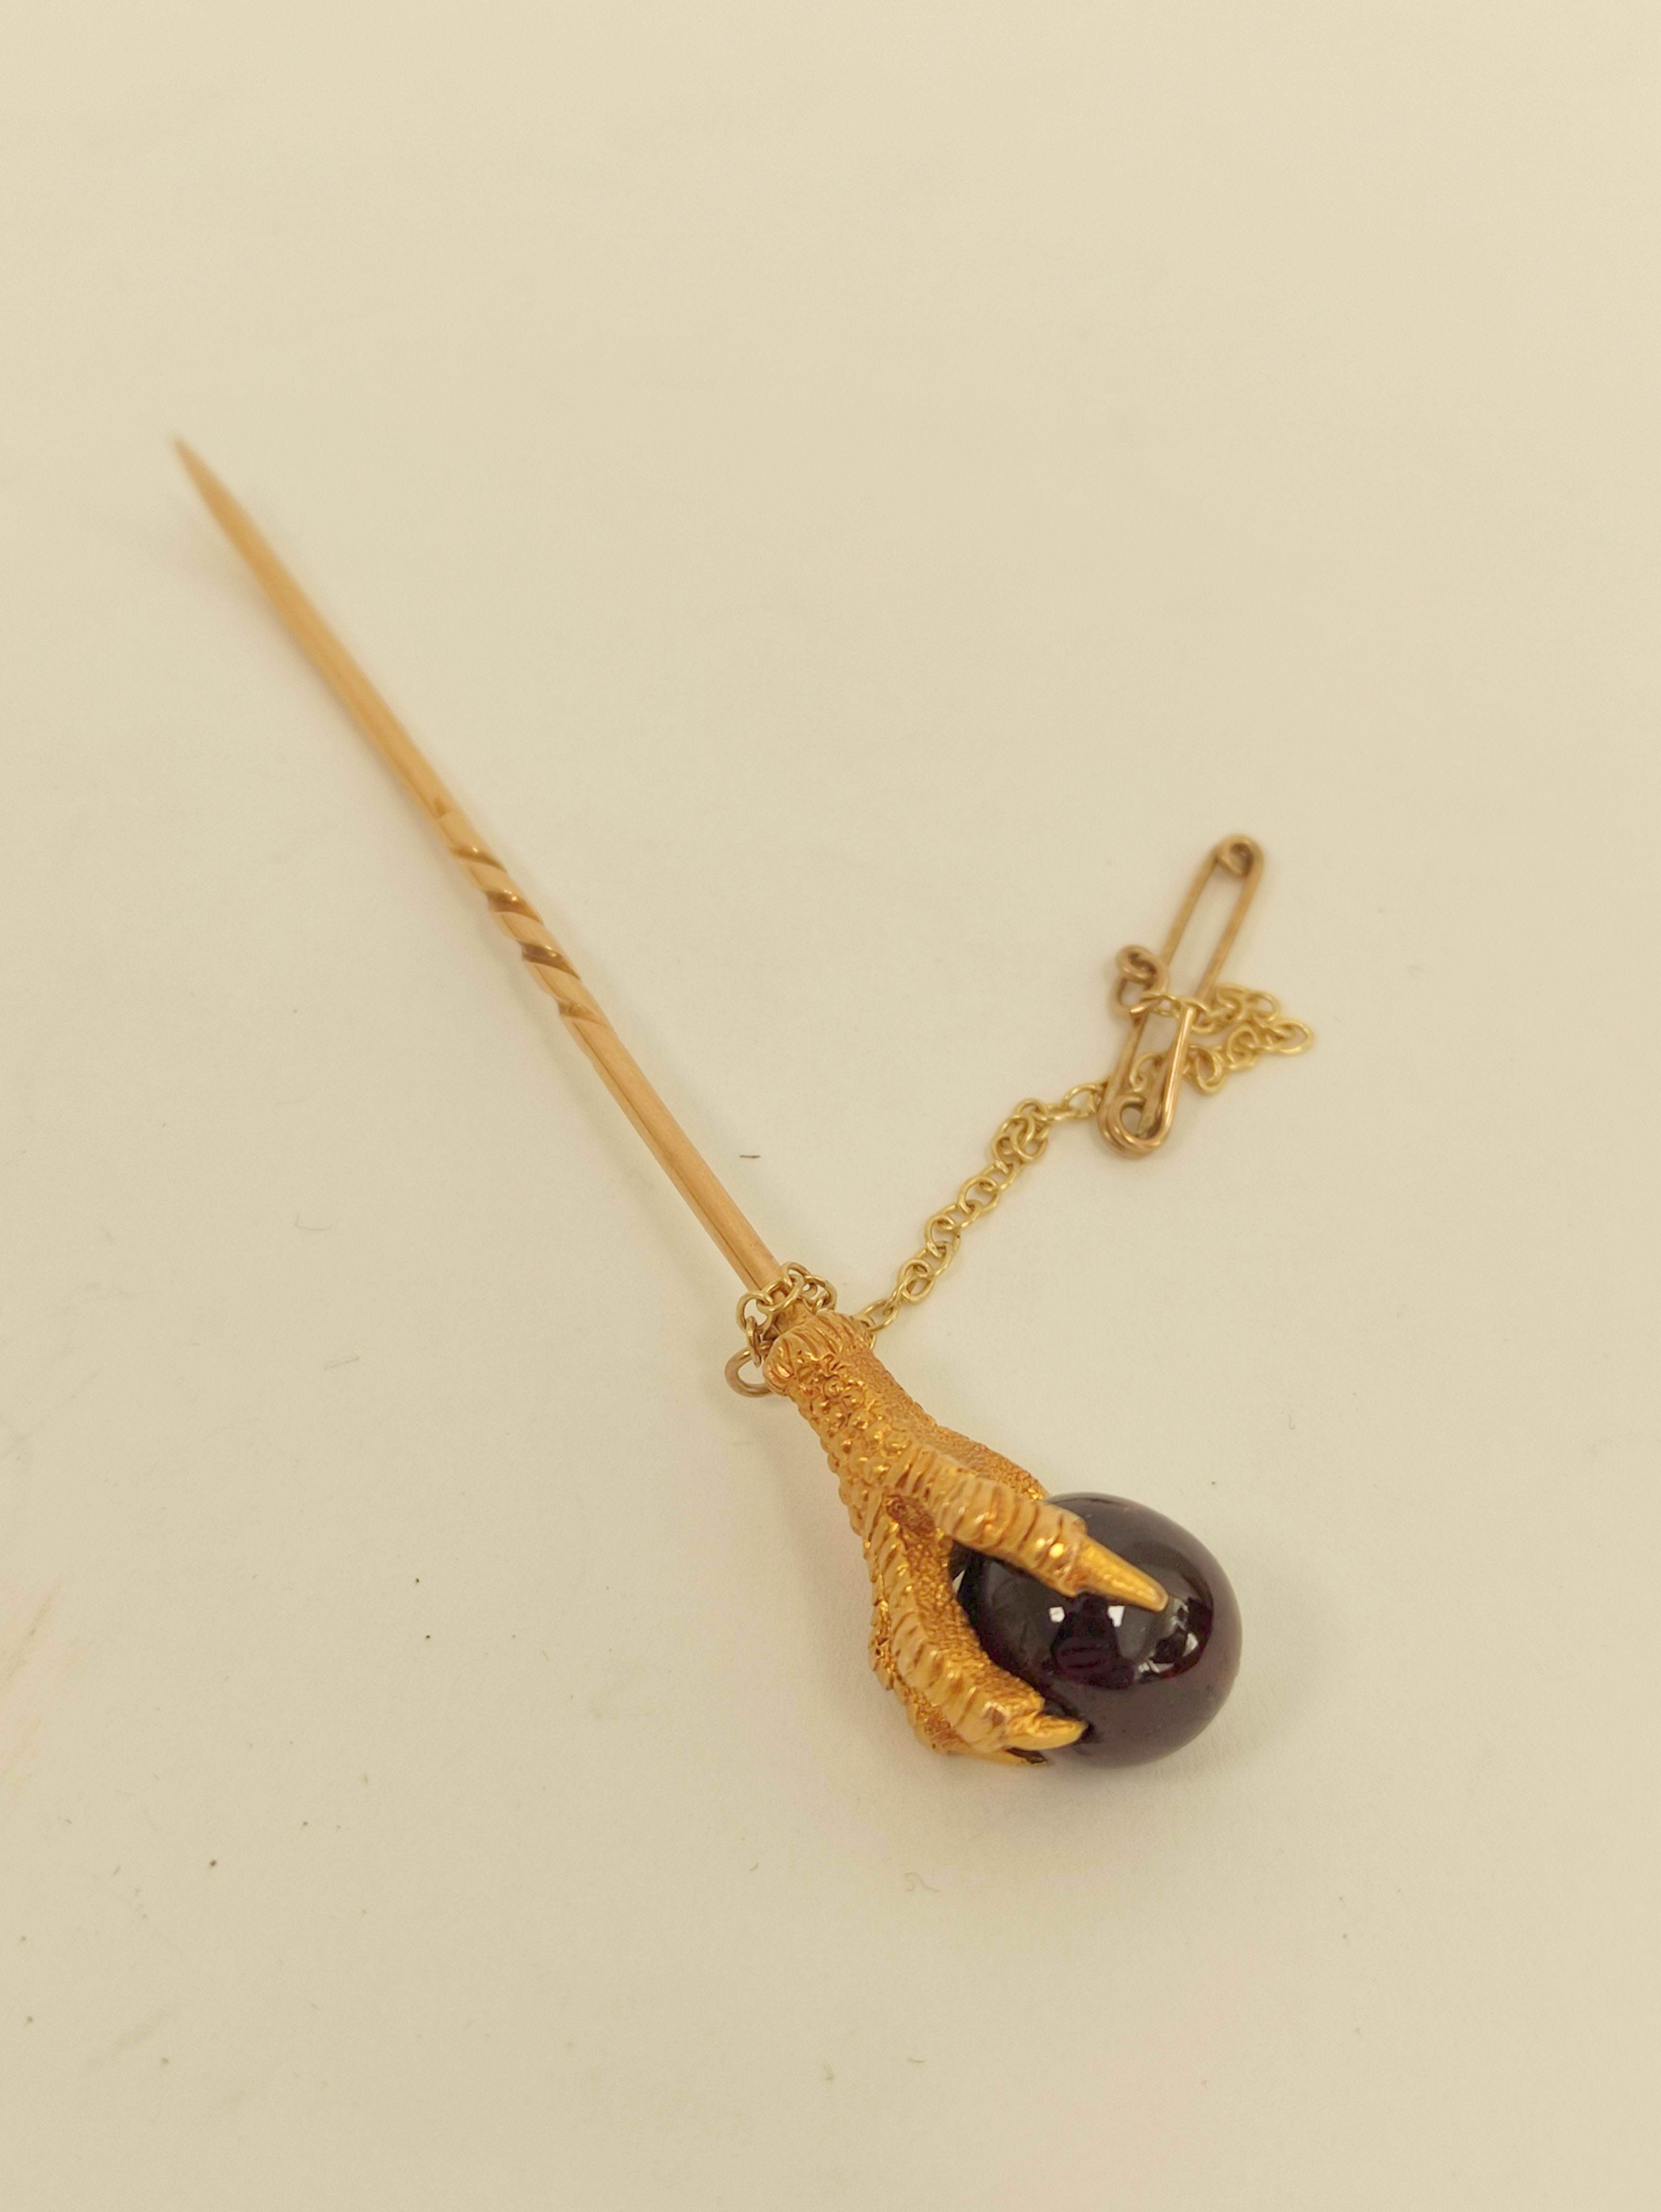 Victorian gold scarf pin with birds claw grasping a garnet bead and a 9ct gold ring with porcelain - Image 6 of 6